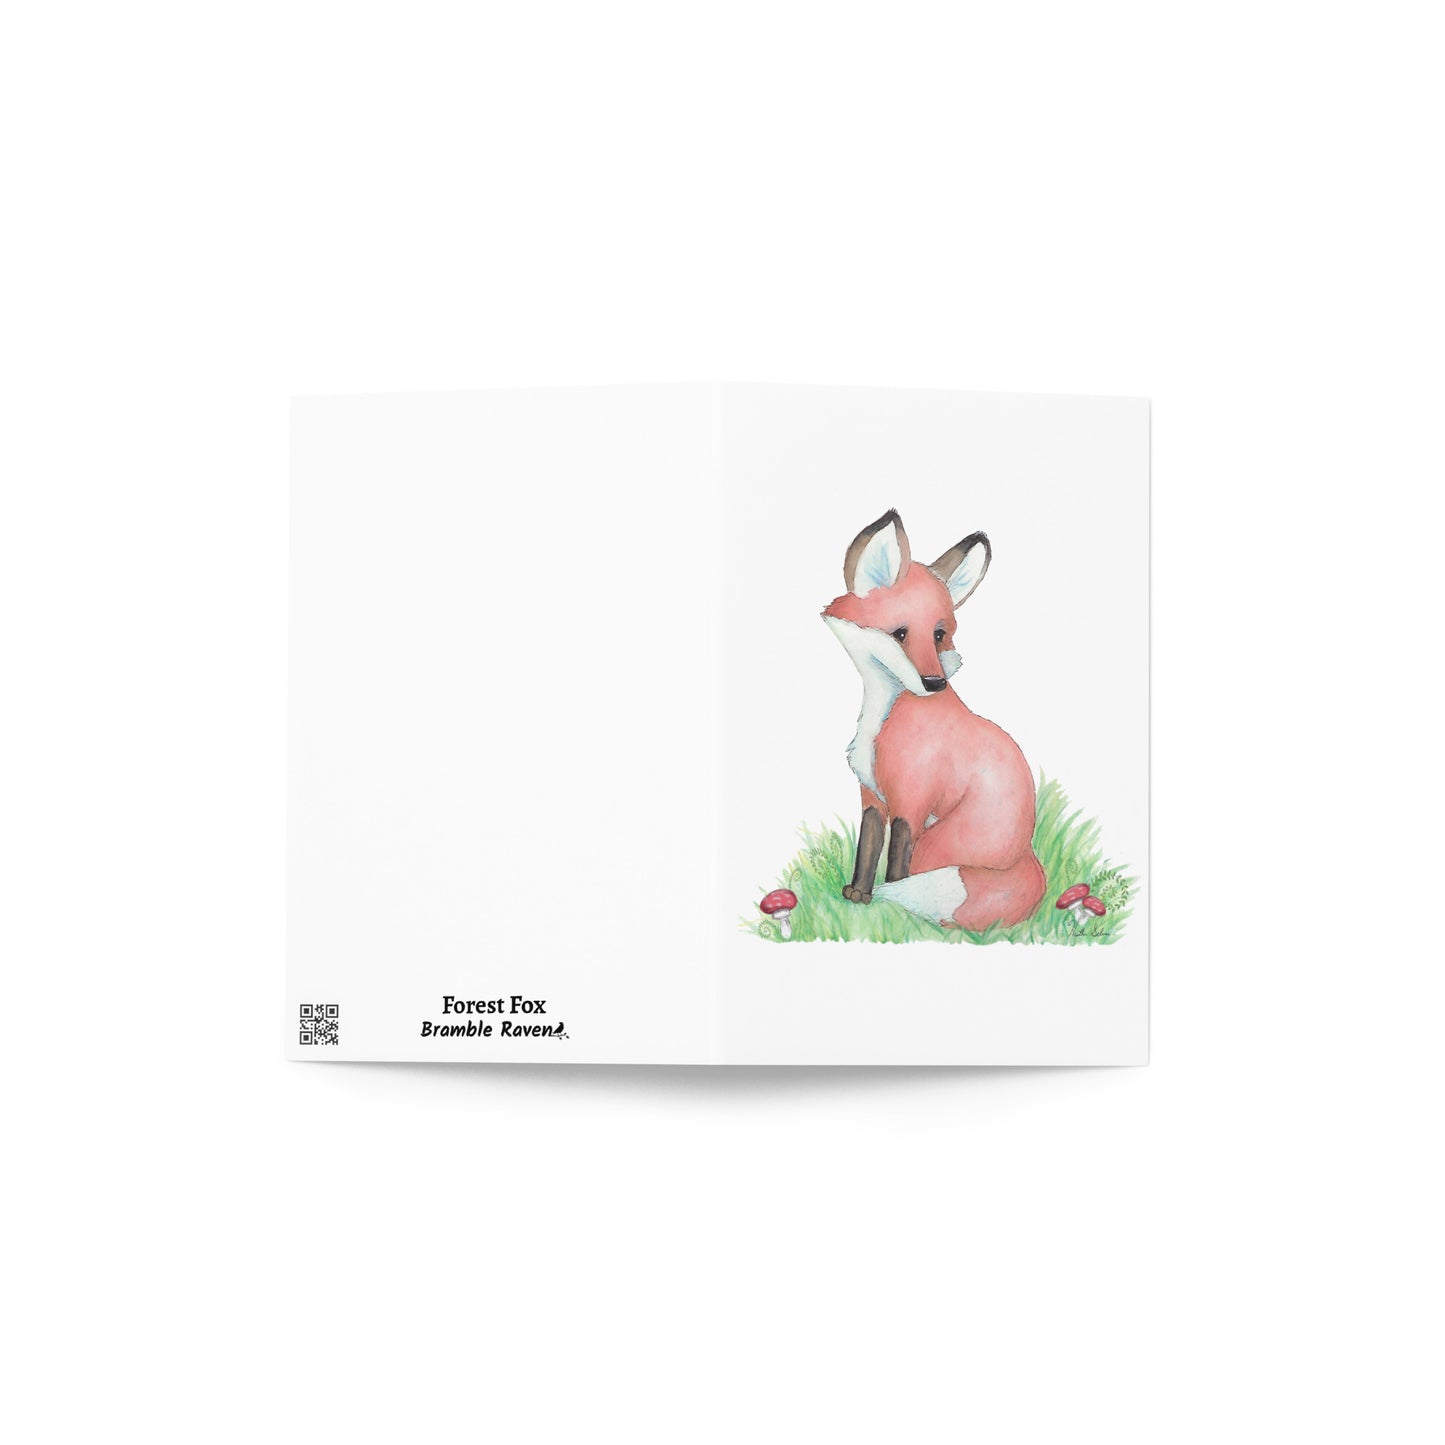 4 by 6 inch forest fox greeting card. Front has watercolor print of a fox in the grass by mushrooms and ferns. Inside is blank. Comes with a white envelope. Made of durable paperboard with vibrant printing. Shows front and back cover.